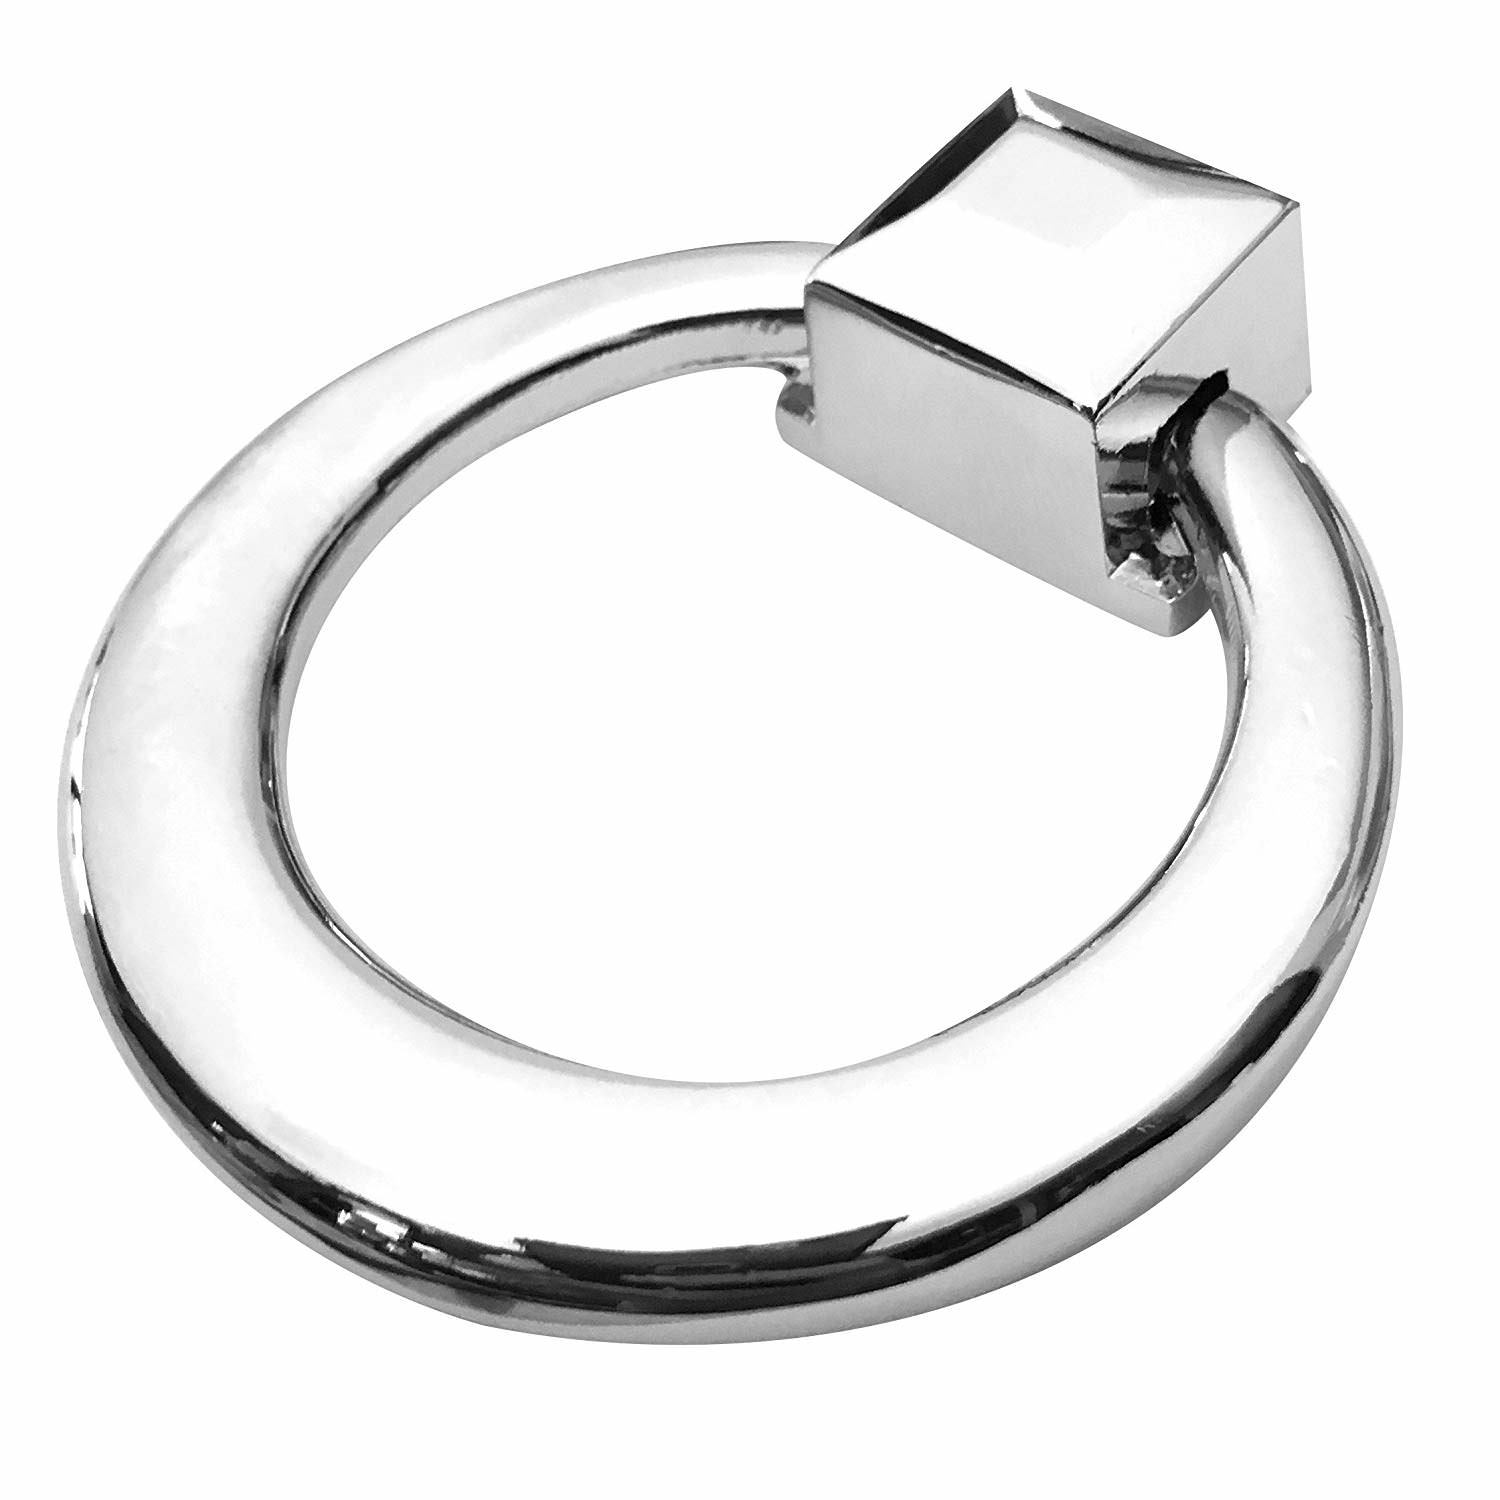 Southern Hills Chrome Ring Pulls, Pack of 5 Drawer Pulls, Cabinet Door Pulls, Cabinet Drawer Pulls, Polished Chrome Ring Pulls Perfect for Kitchen and Bath Cabinets and Furniture. SHKM3282-CHR-5 - image 1 of 5